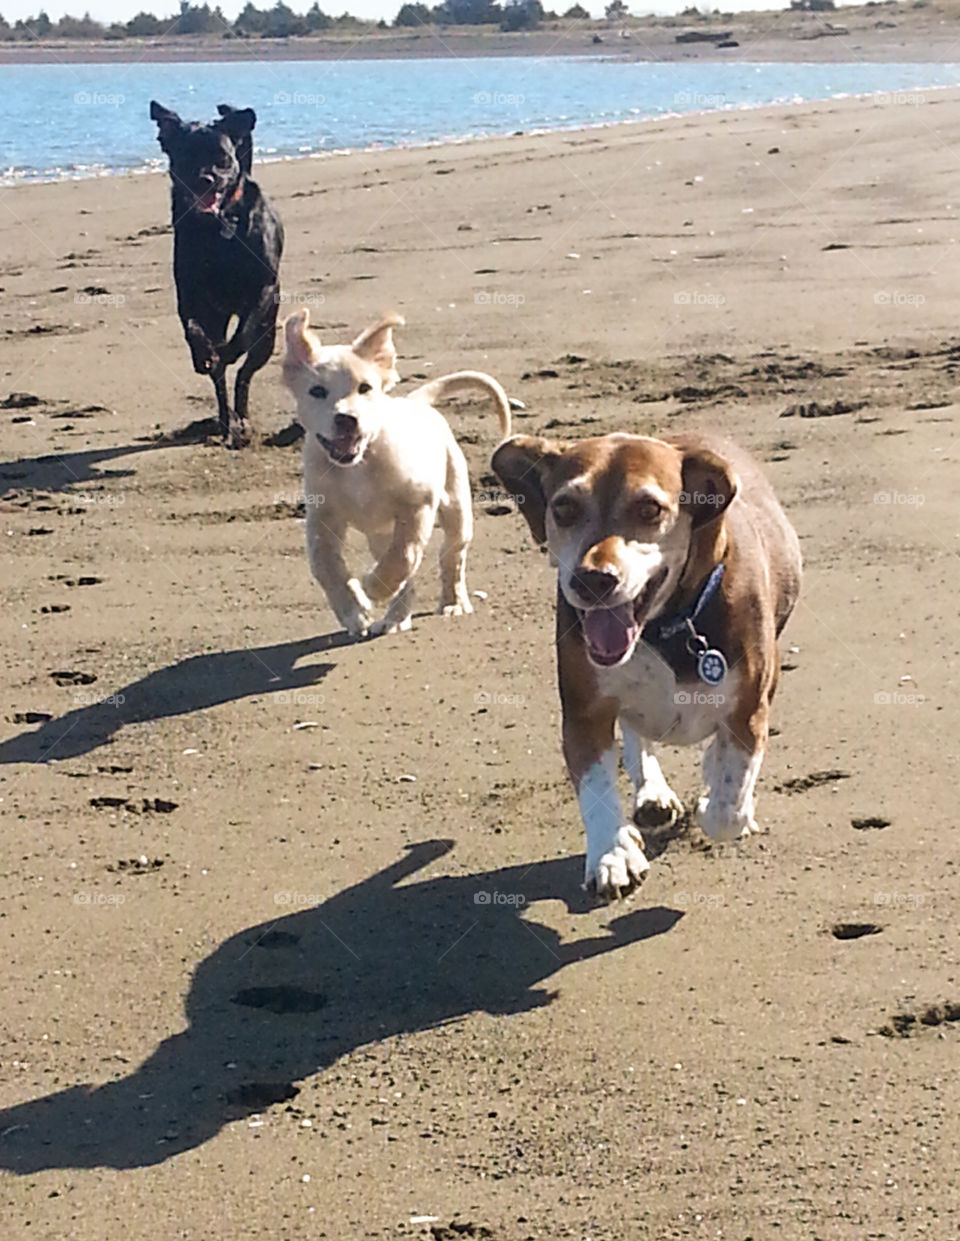 doggy play date on the beach. three pups playing chase on the beach.